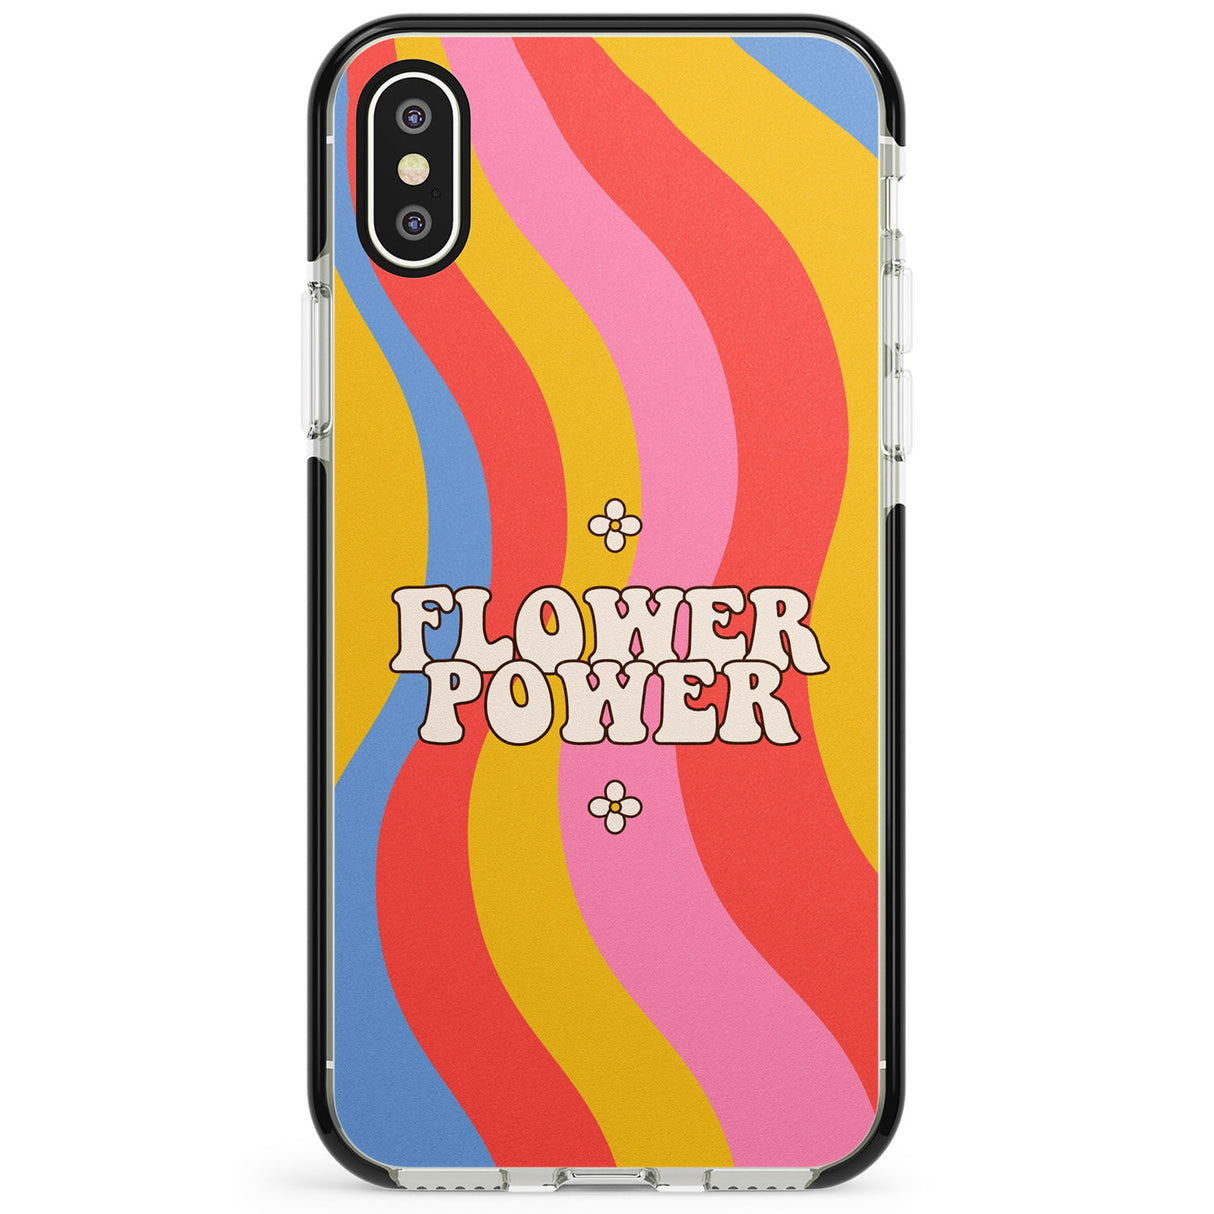 Melting Flower Power Phone Case for iPhone X XS Max XR